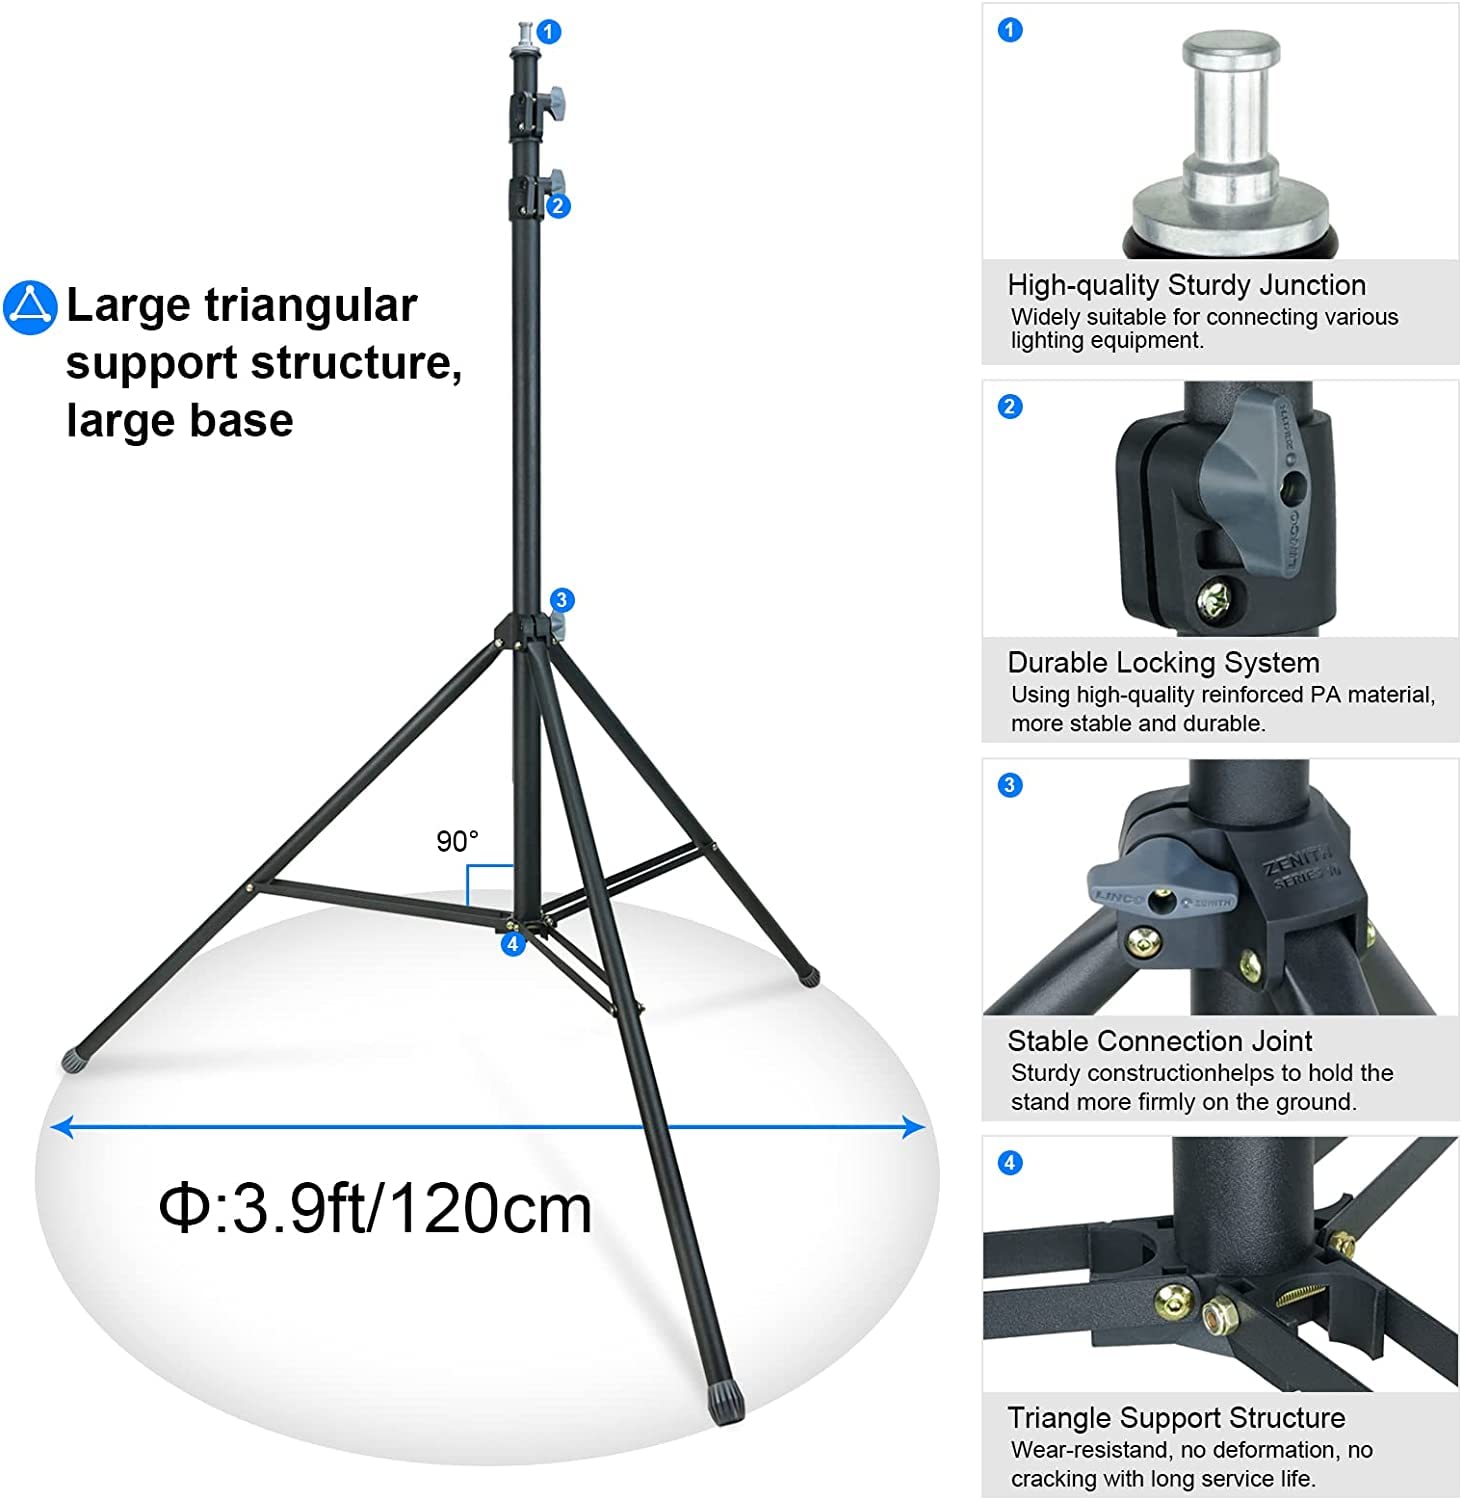 Photography Light Tripod 9 Feet Stand for Ring Light, Reflector & More Ideal for Outdoor Indoor Shoots